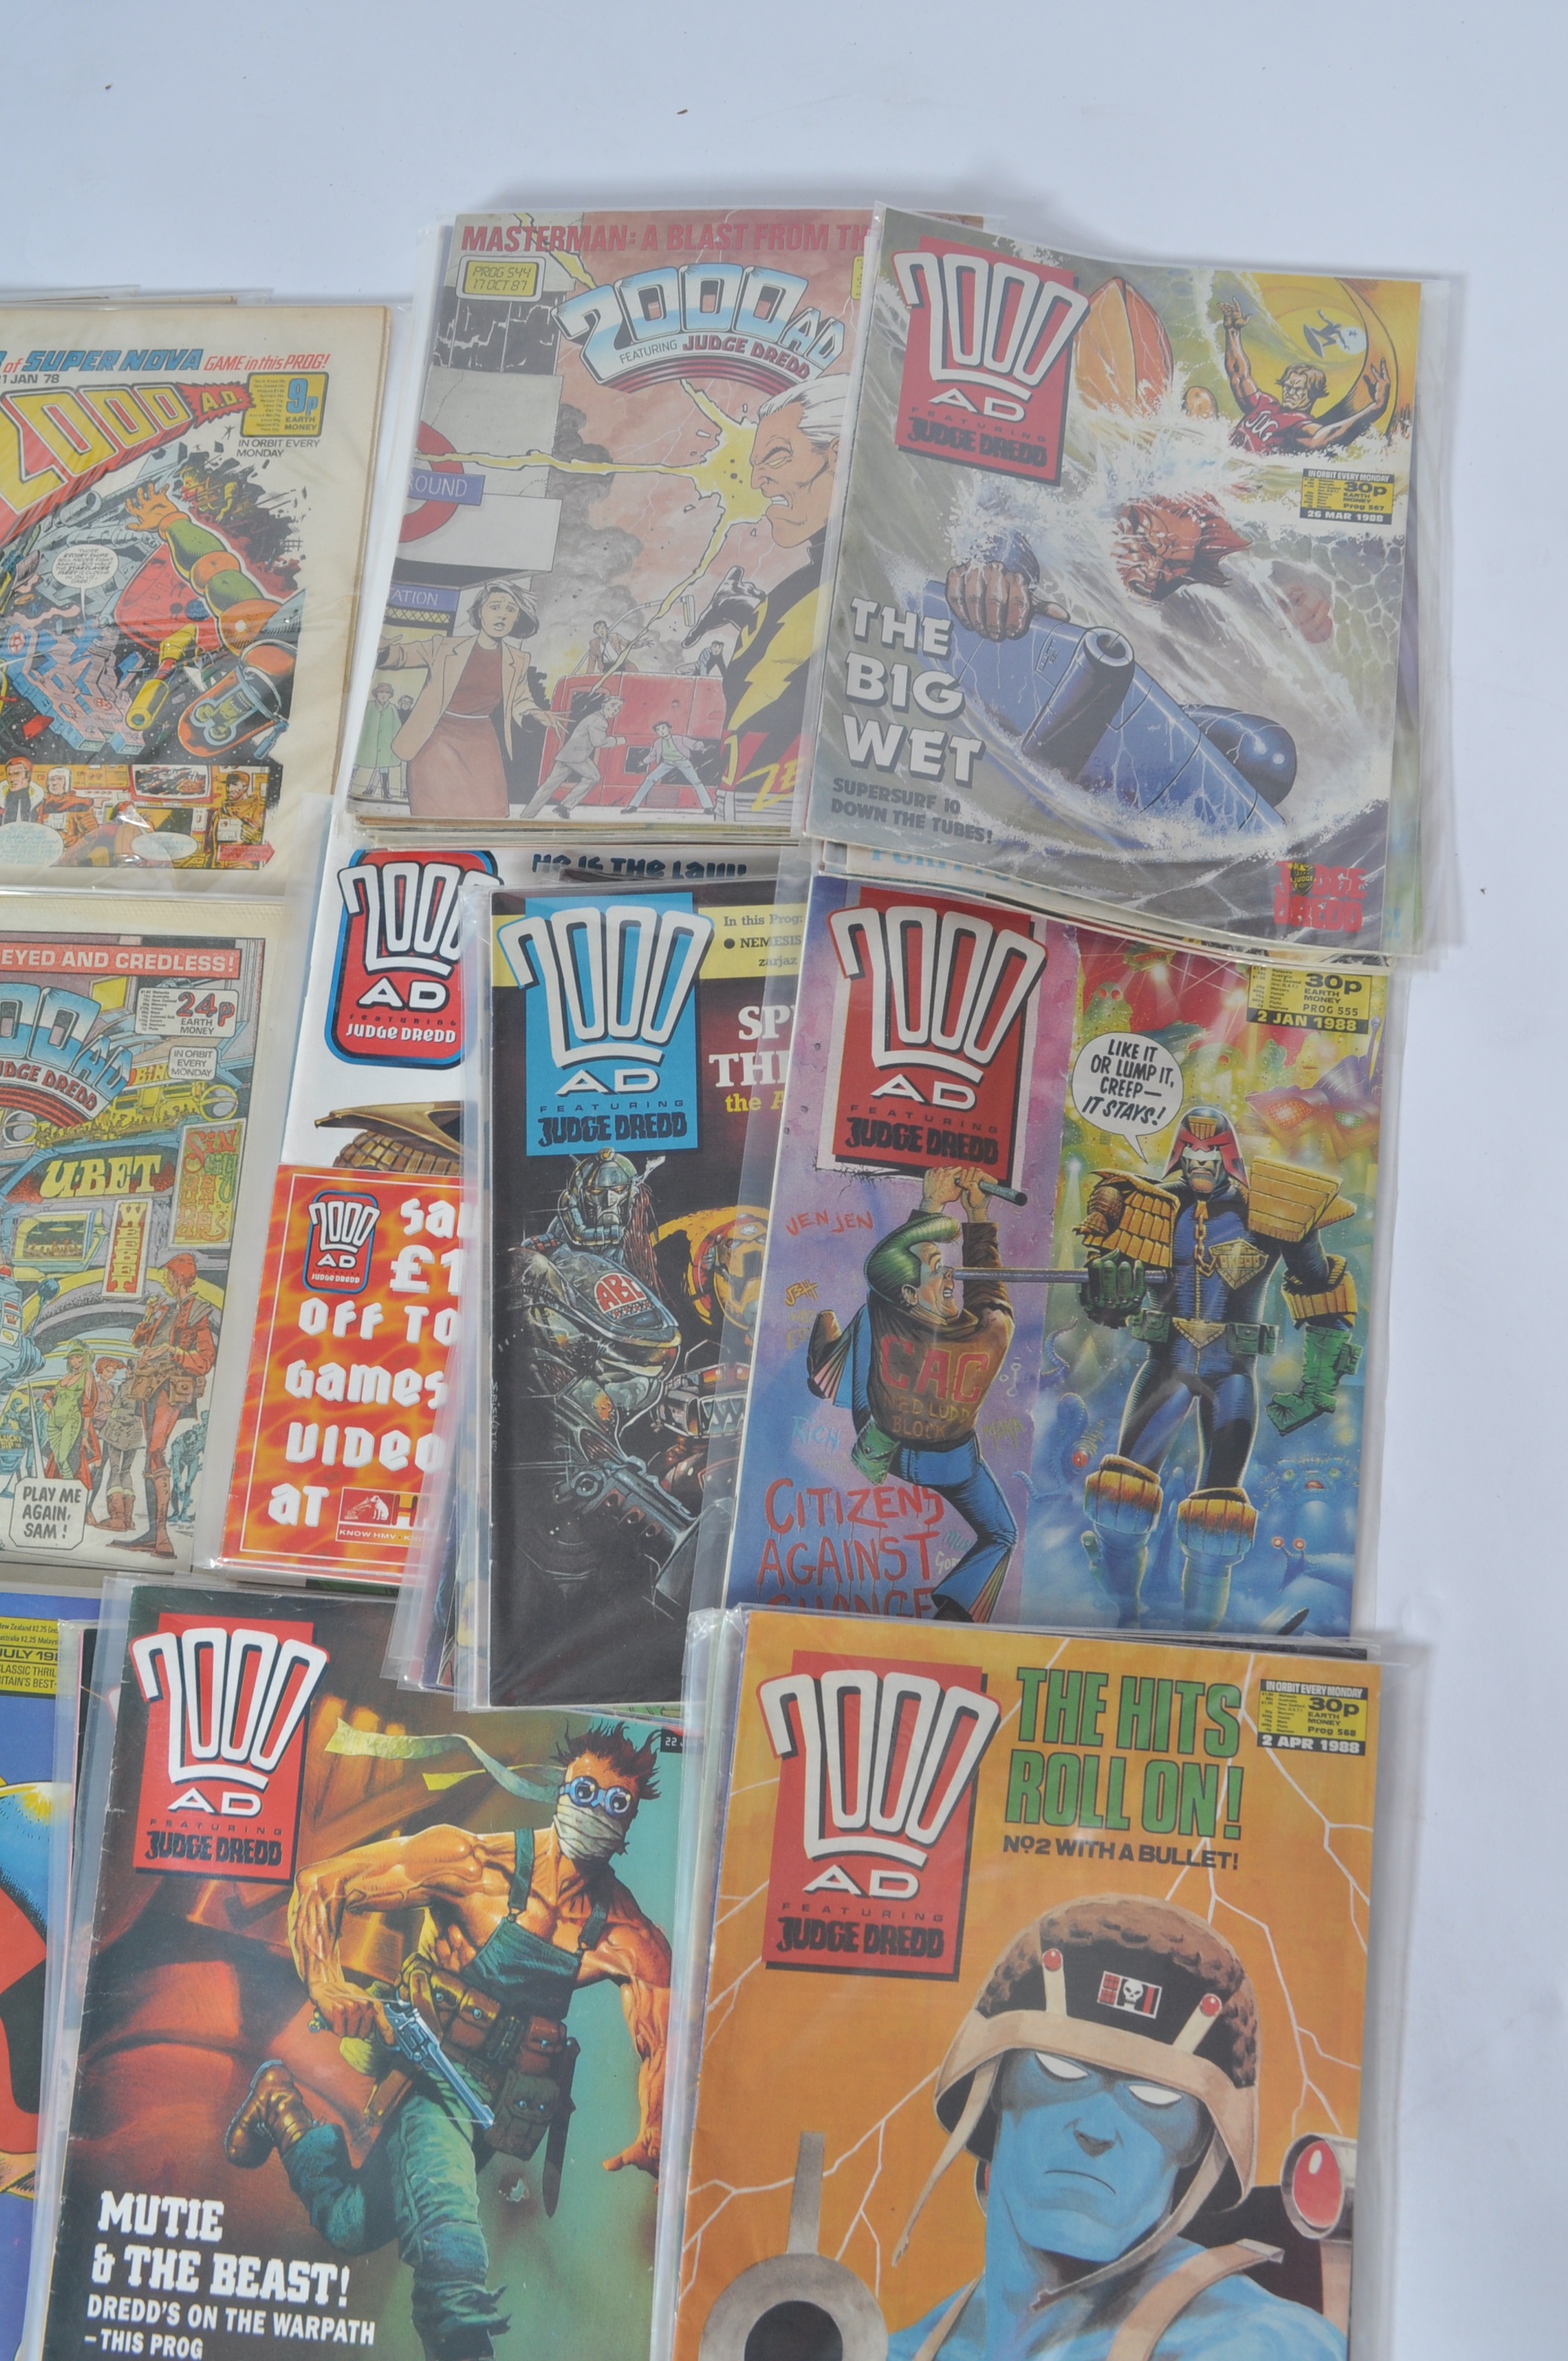 COMIC BOOKS - 2000AD - LARGE COLLECTION OF VINTAGE COMIC BOOKS - Image 2 of 17